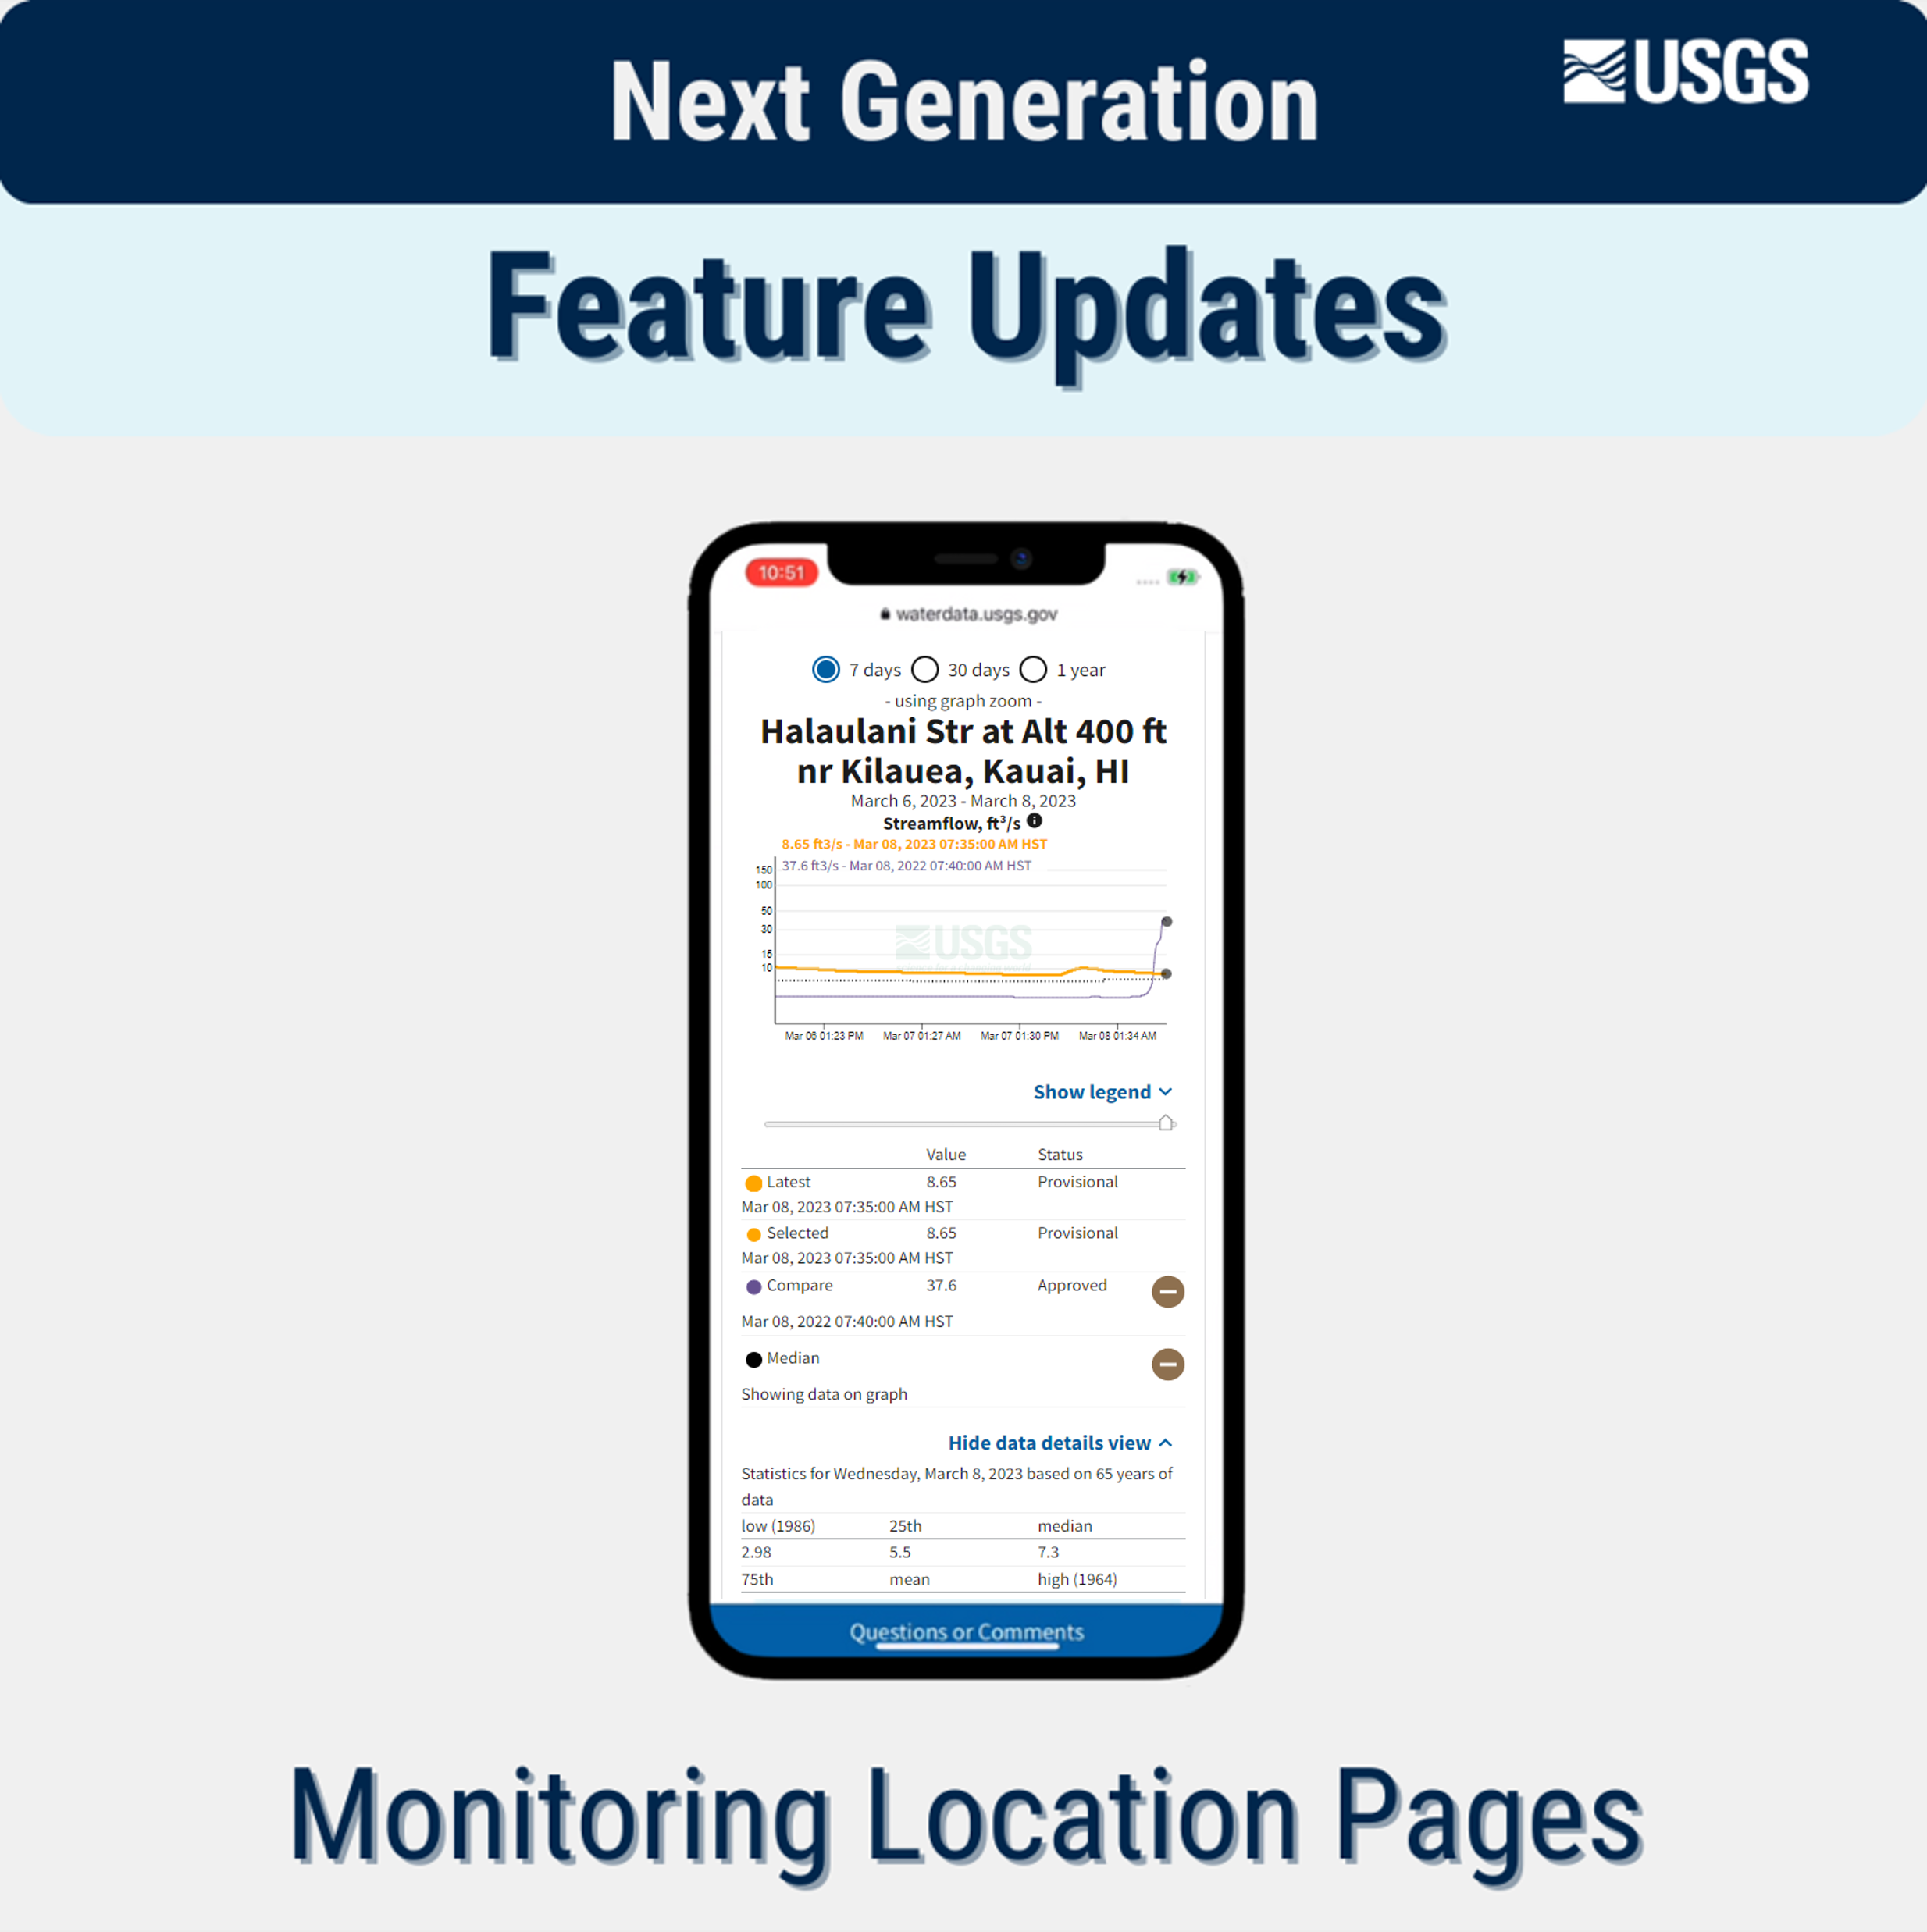 Next Generation Monitoring Location Pages Update